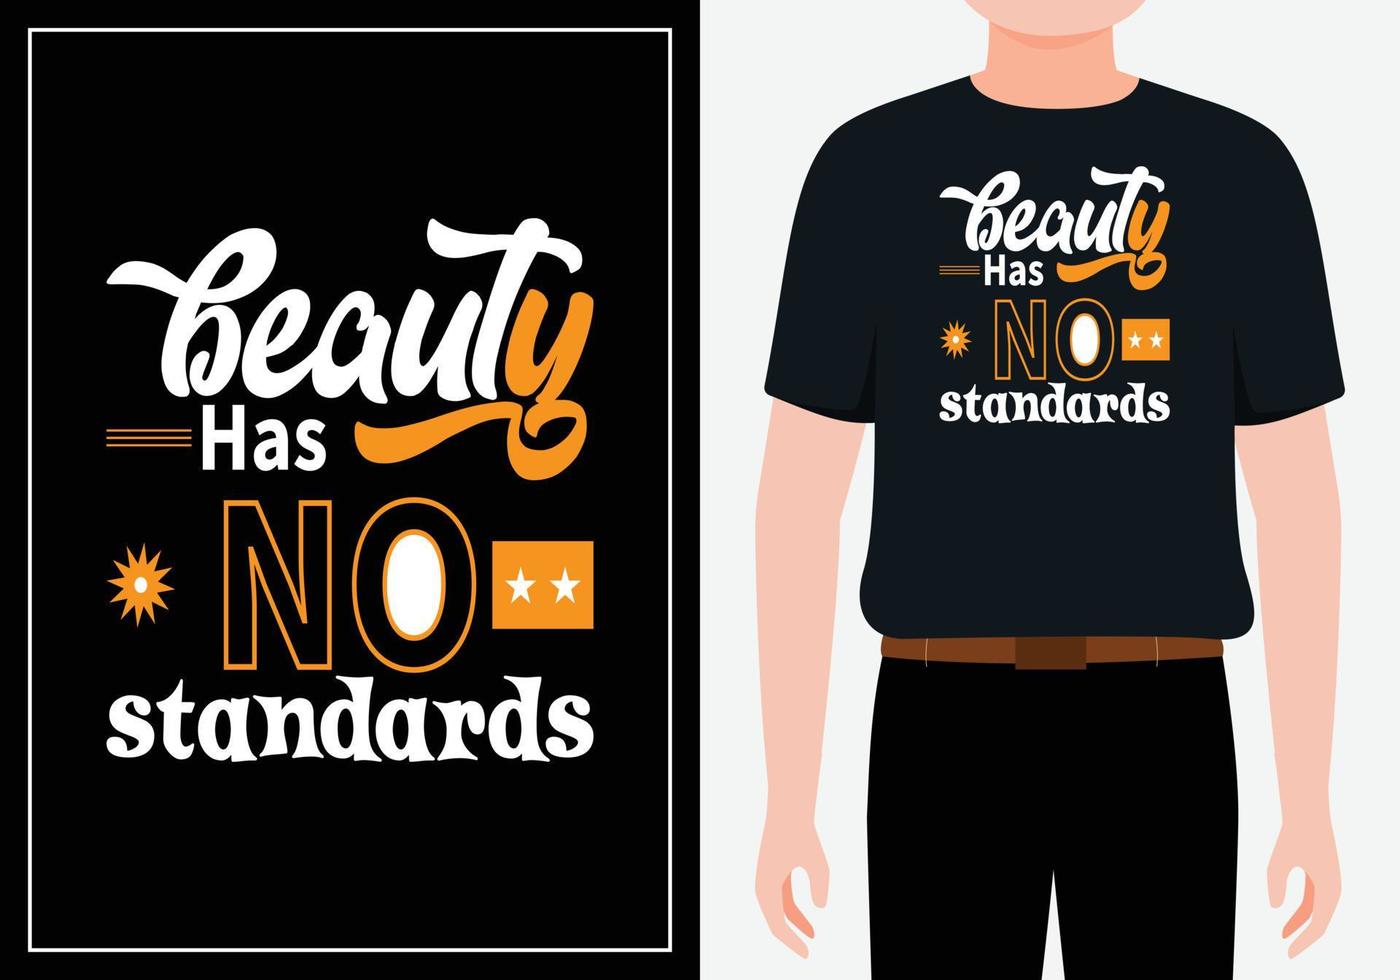 Beauty has no standards modern quotes t shirt design free Vector